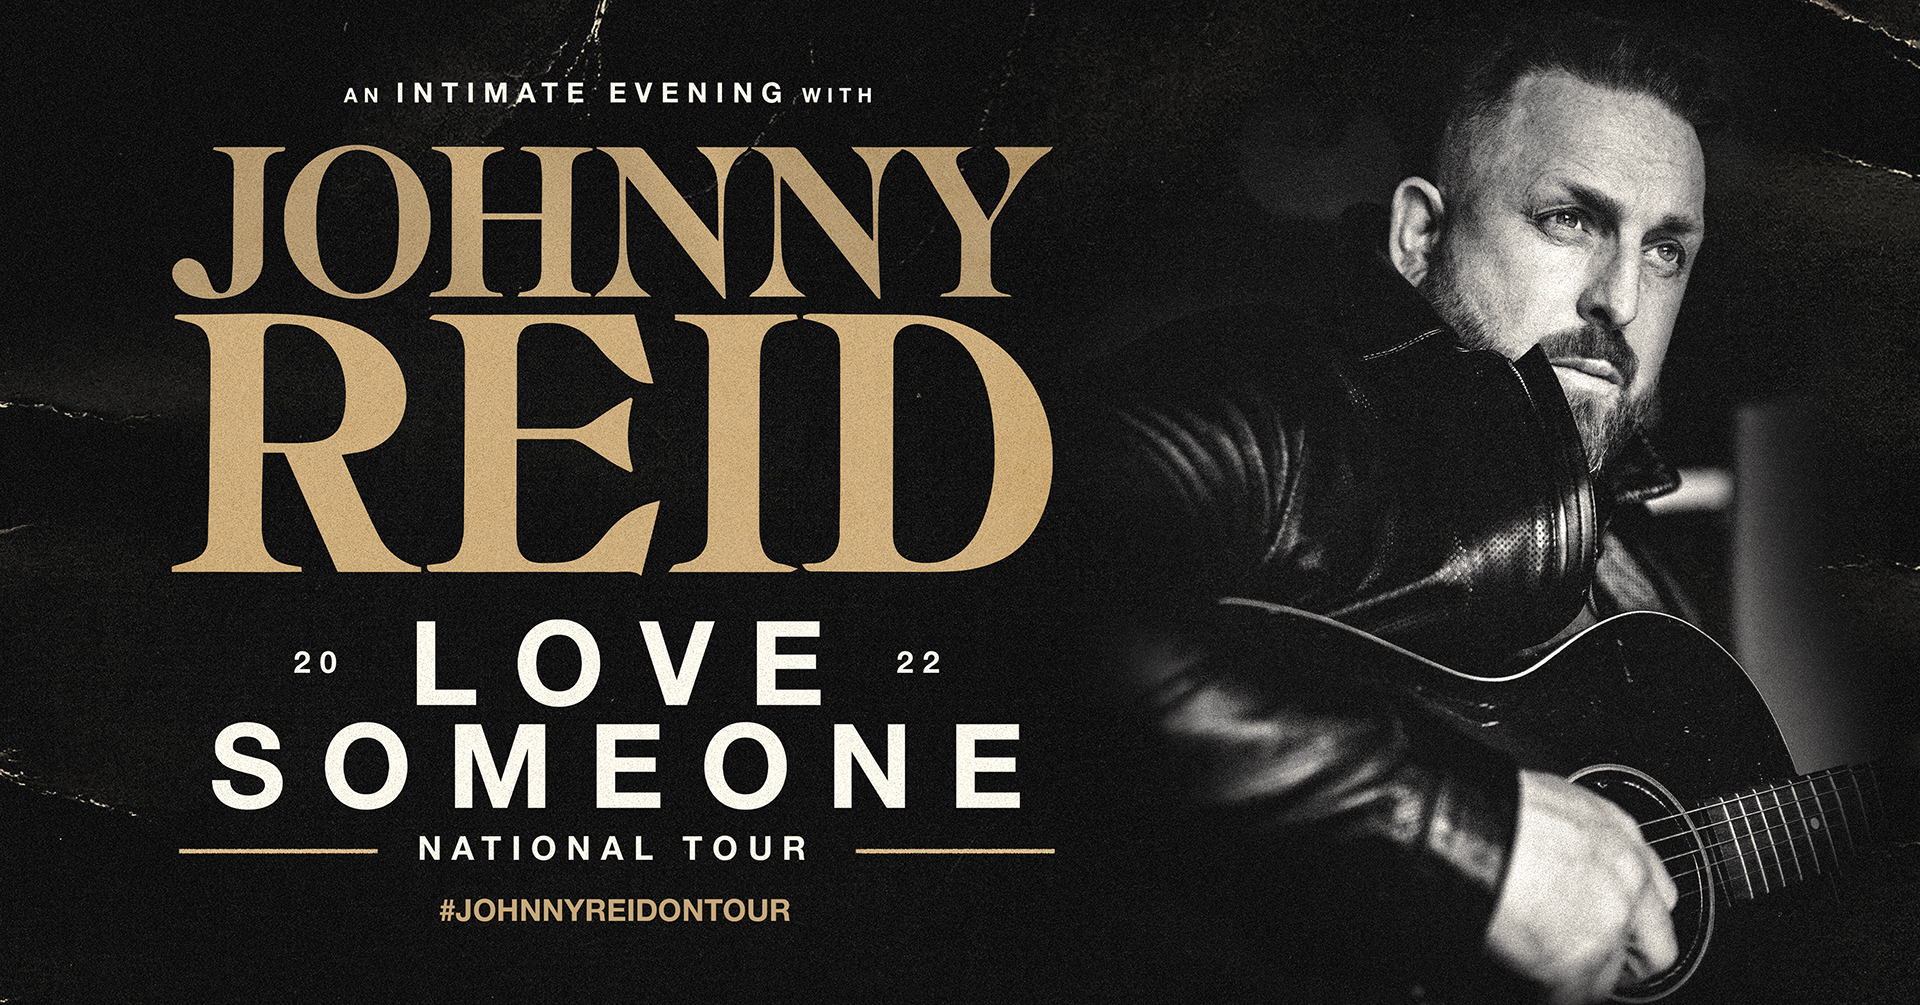 SOLD OUT: An Intimate Evening with Johnny Reid, Love Someone National ...